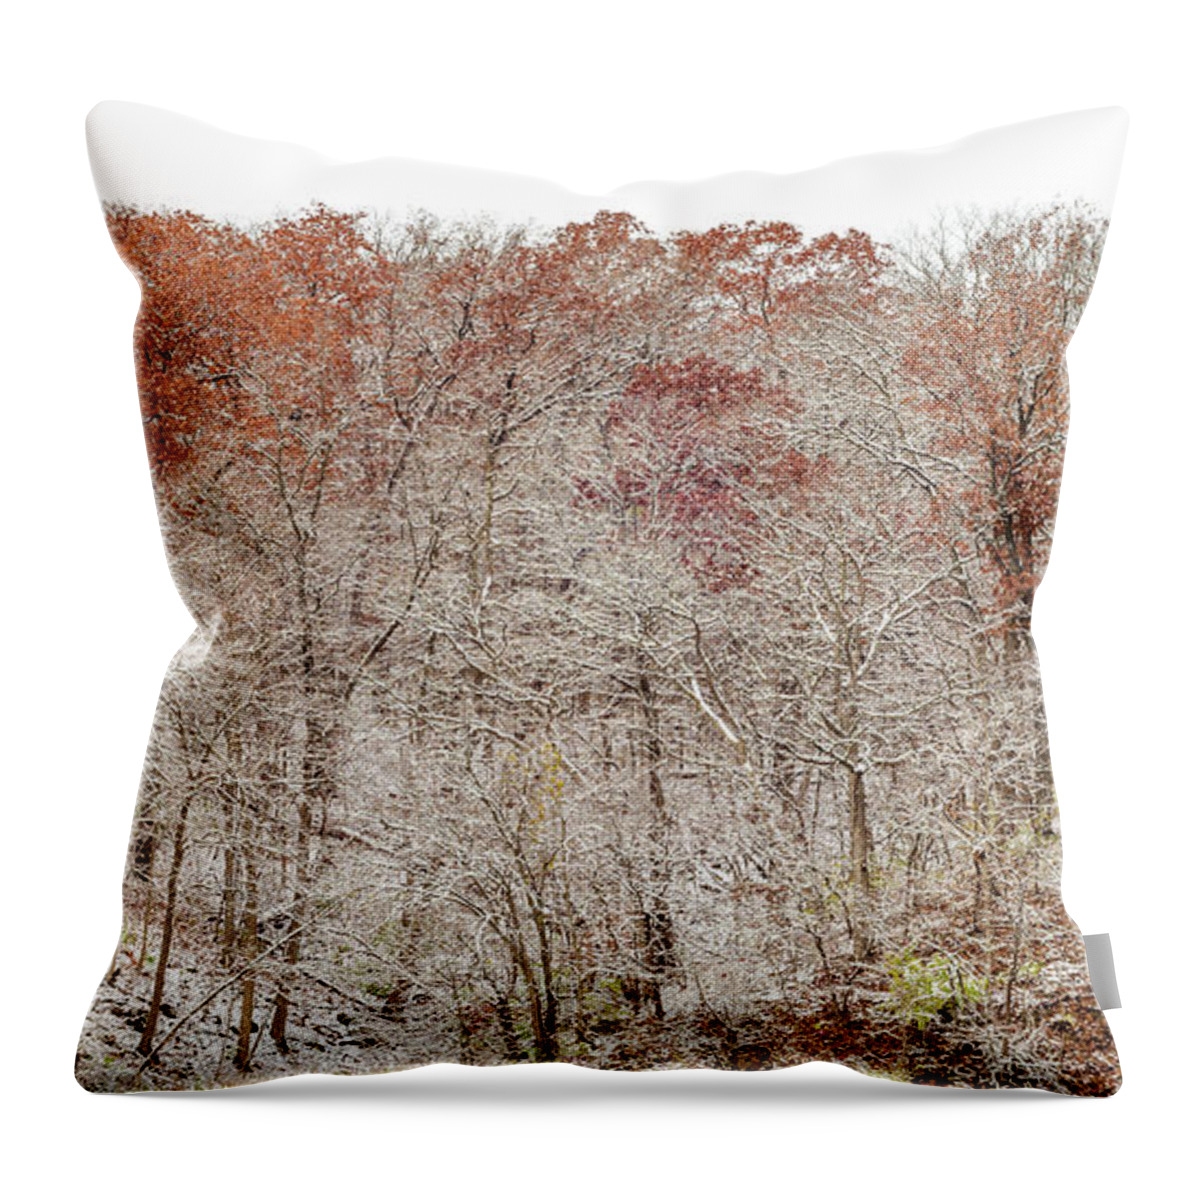 Trees Throw Pillow featuring the photograph Holding Onto Fall by Tamara Becker